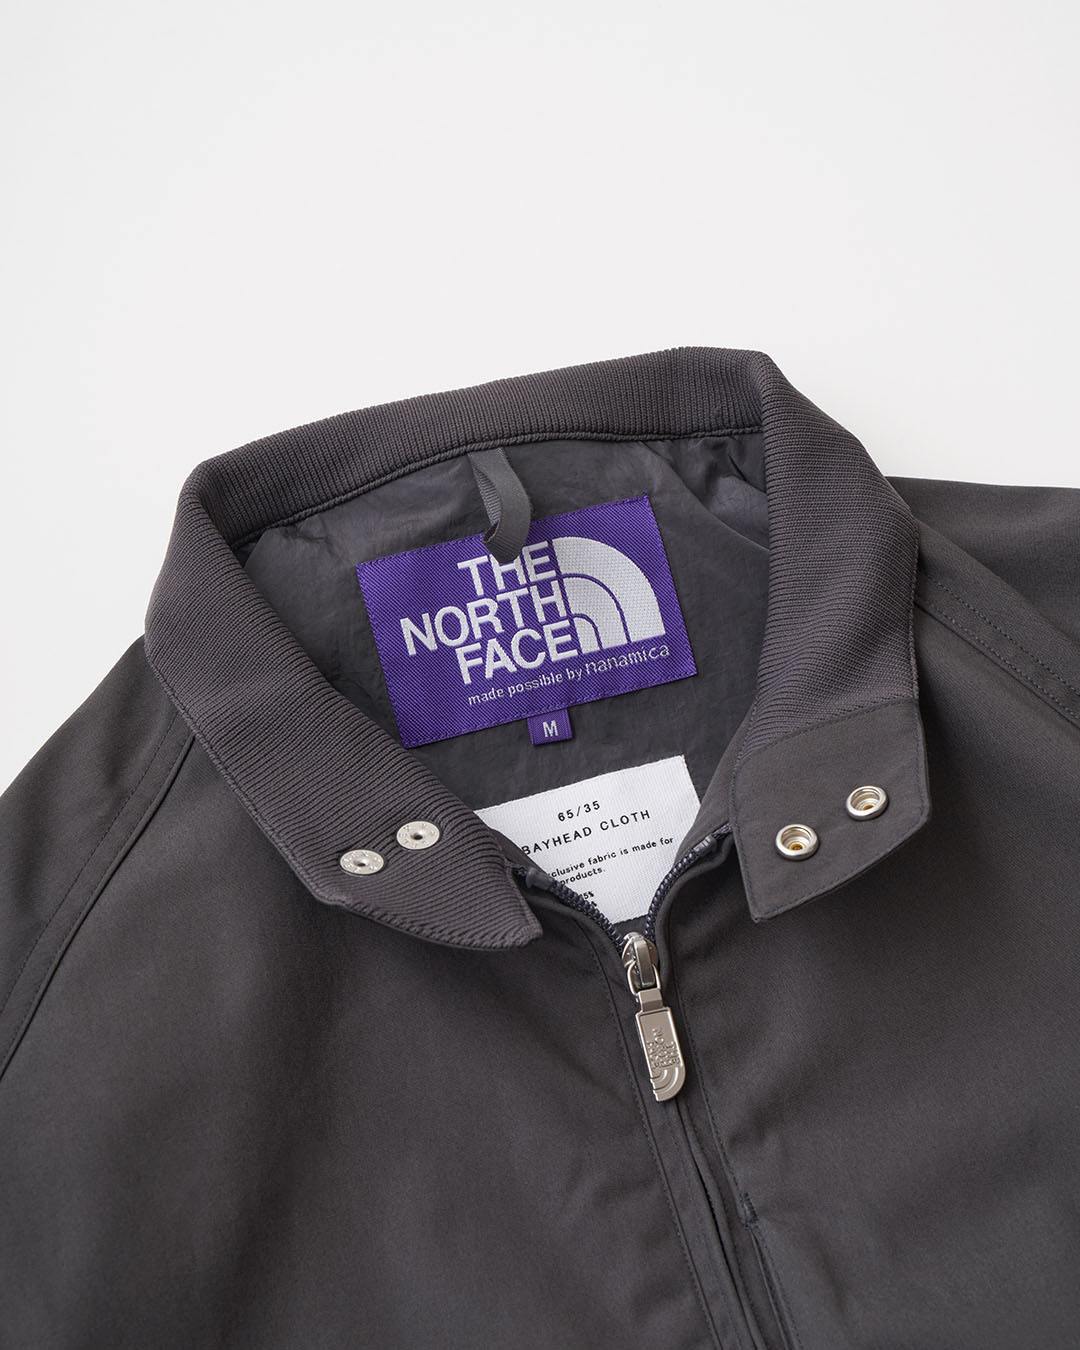 nanamica / THE NORTH FACE PURPLE LABEL / Featured Product vol.64